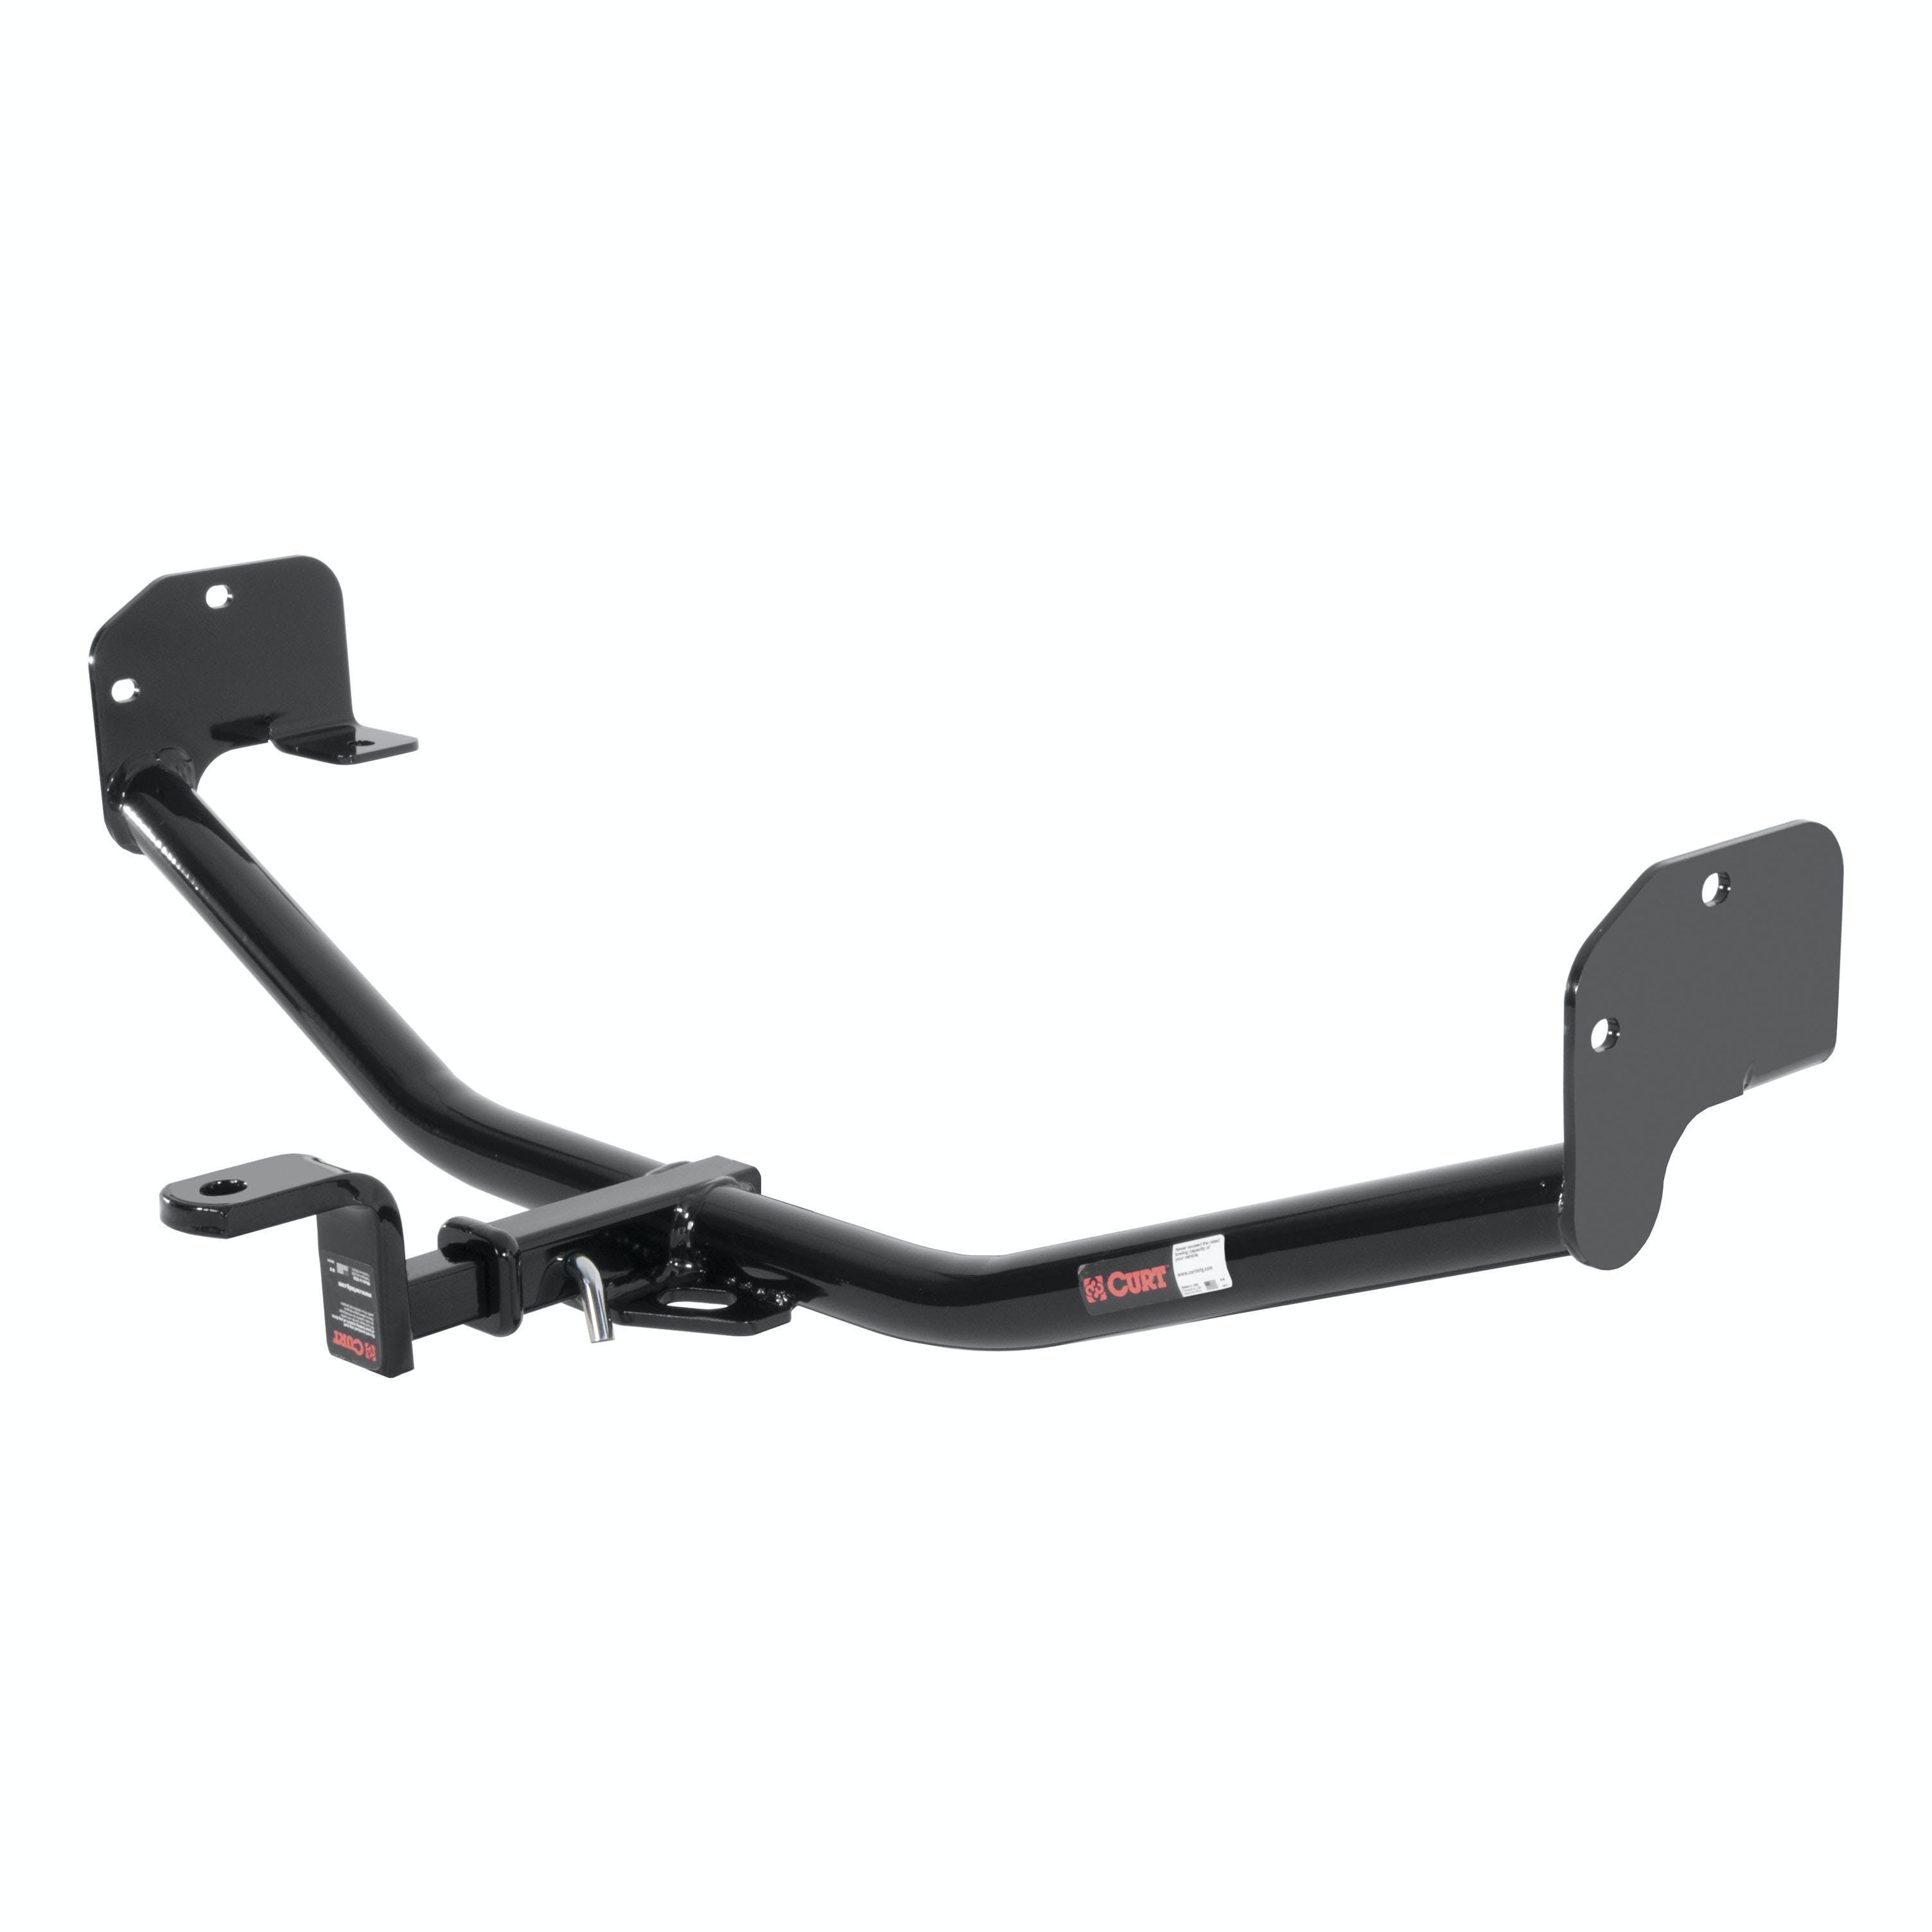 CURT 110483 Class 1 Trailer Hitch, 1-1/4 Ball Mount, Select Ford Mustang